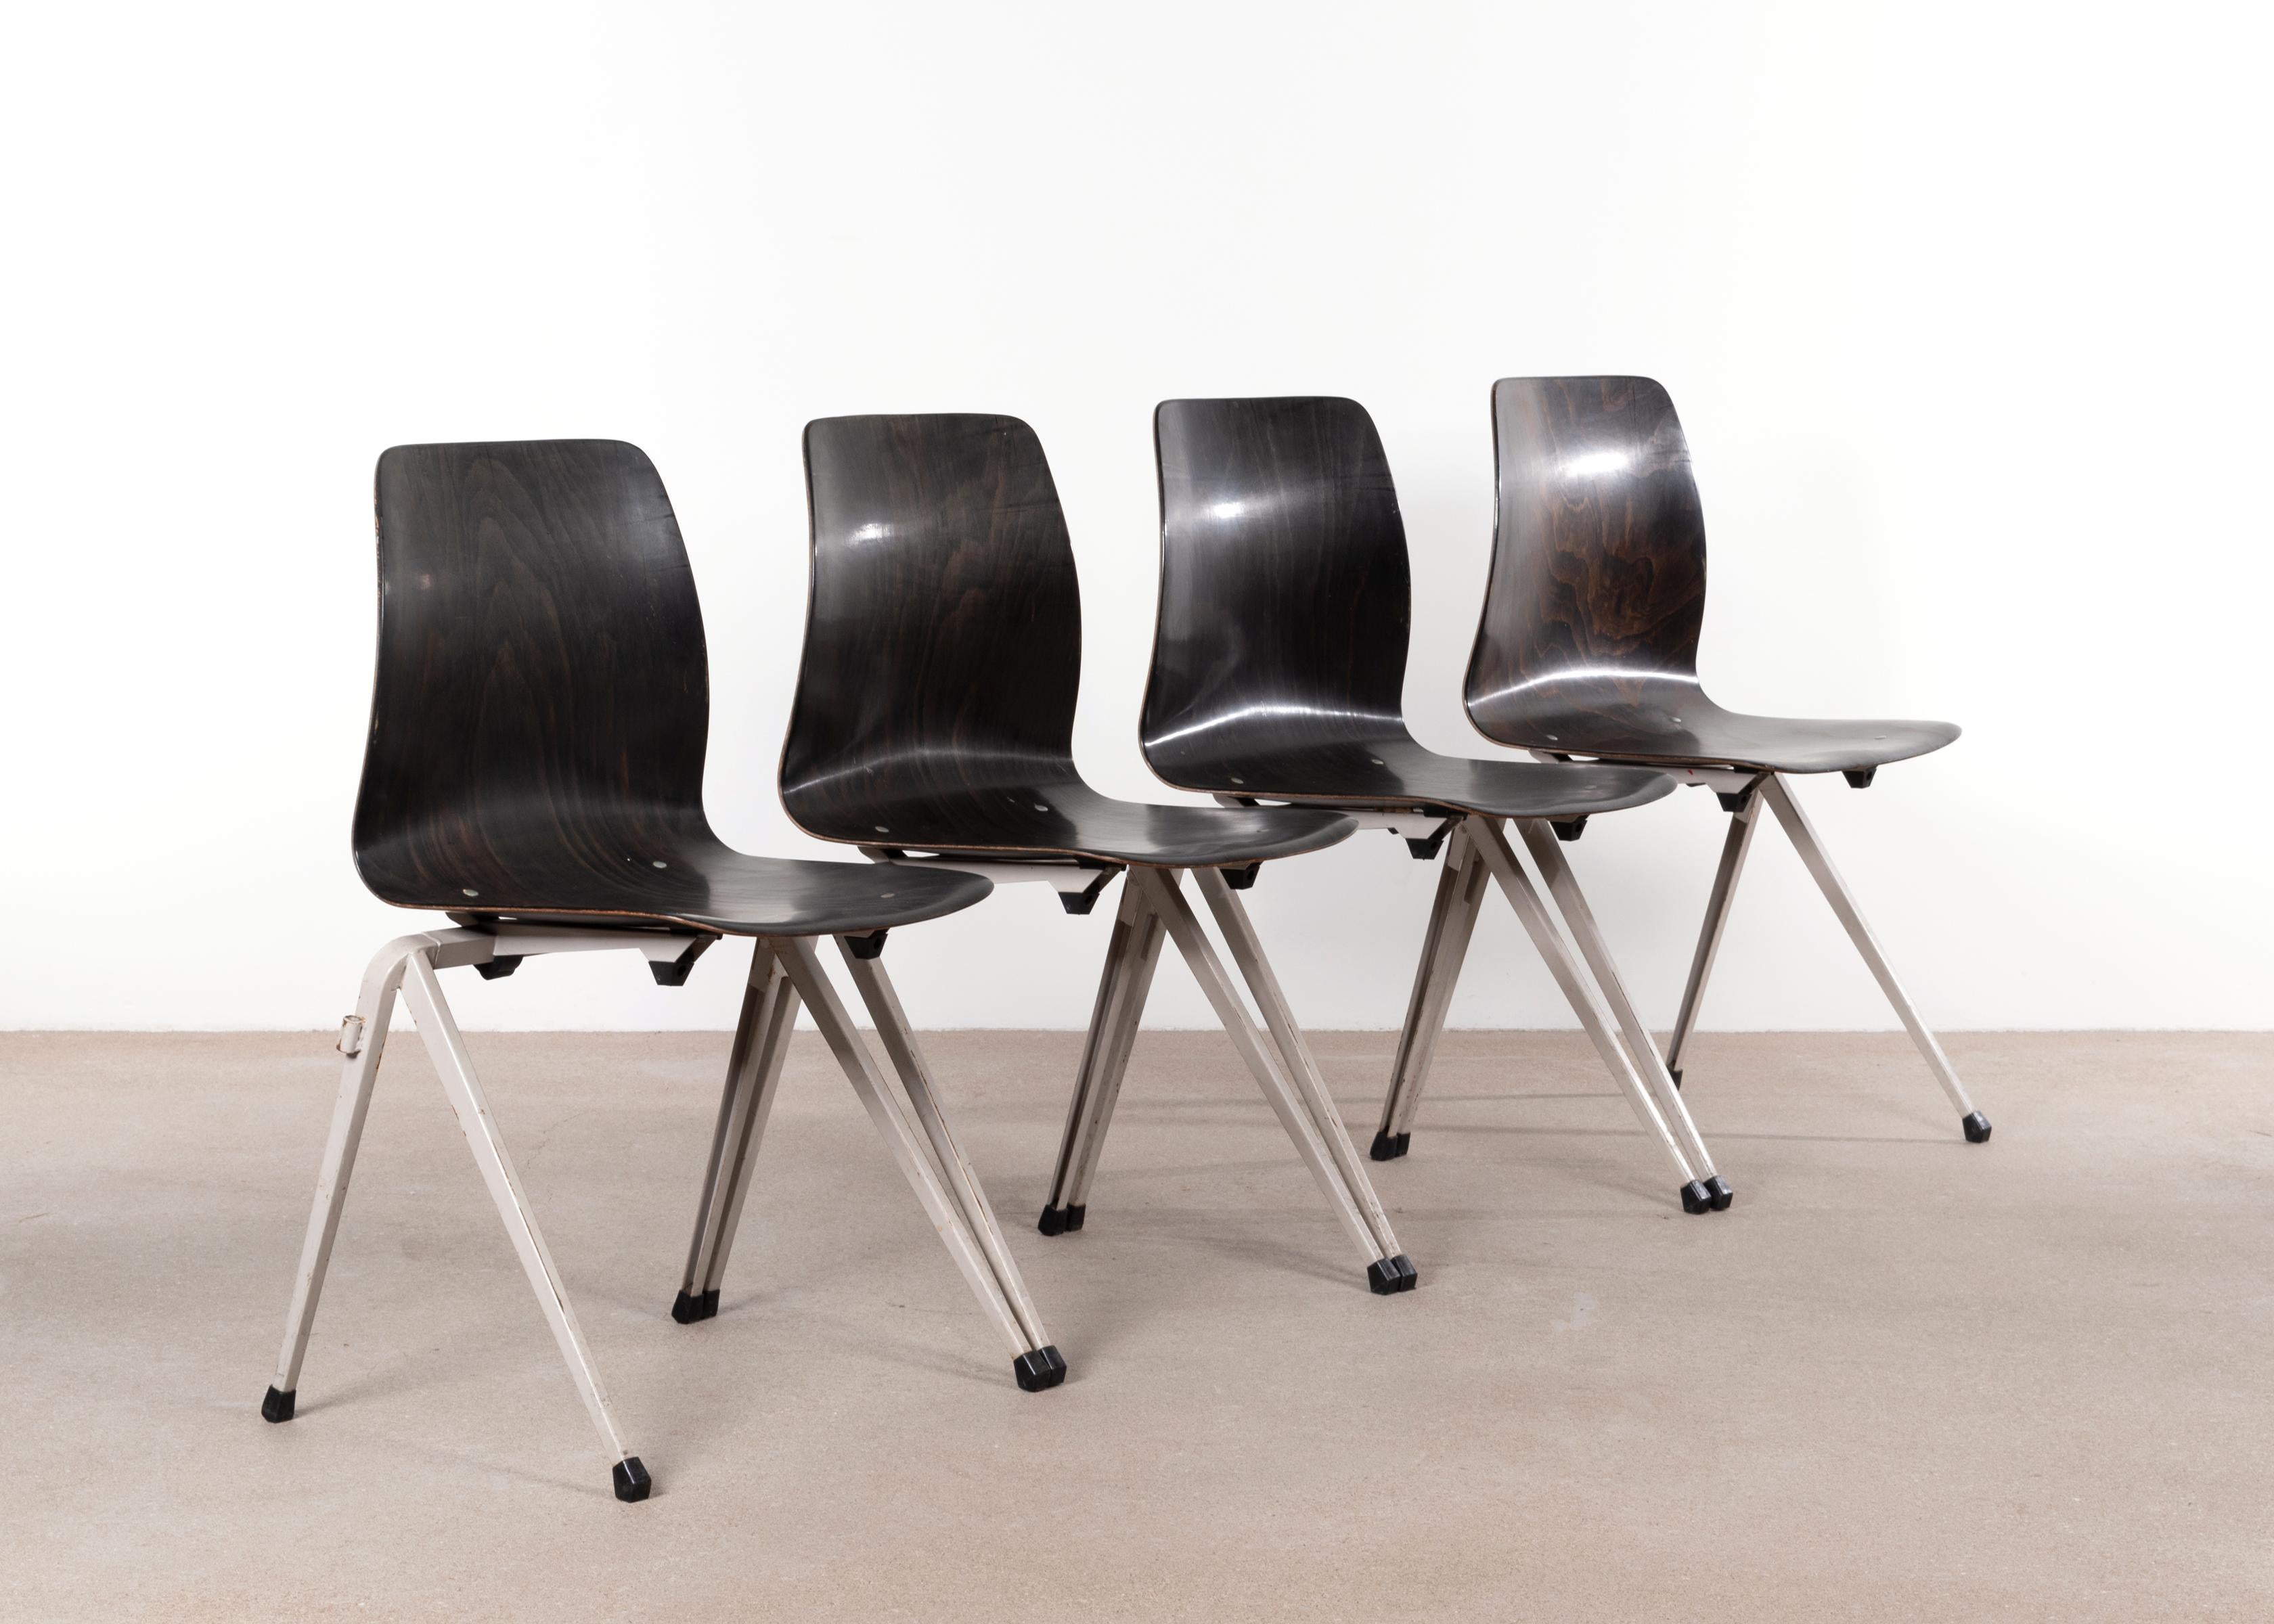 Late 20th Century Multiple Galvanitas S20 Stackable Black and Grey Plywood Chairs, Netherlands